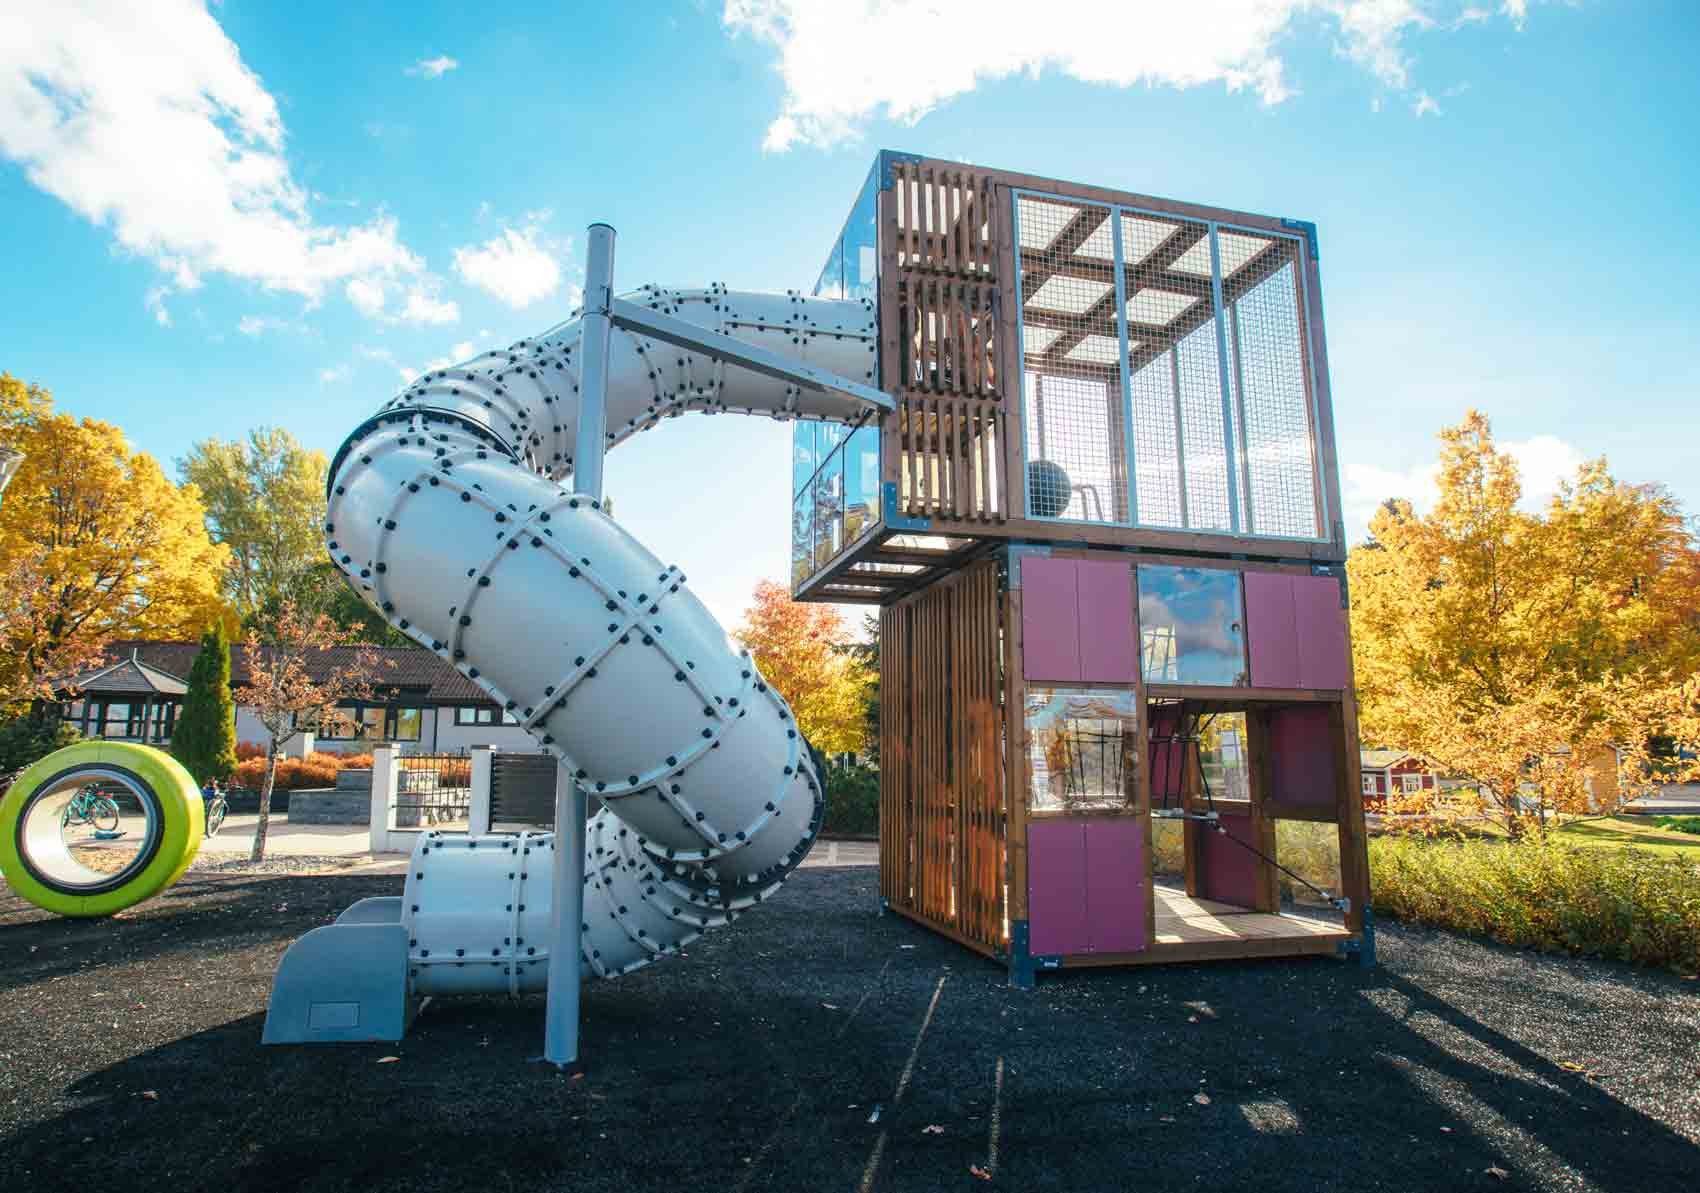 Modern play tower made of Nordic wood with tube slide and colorful panels